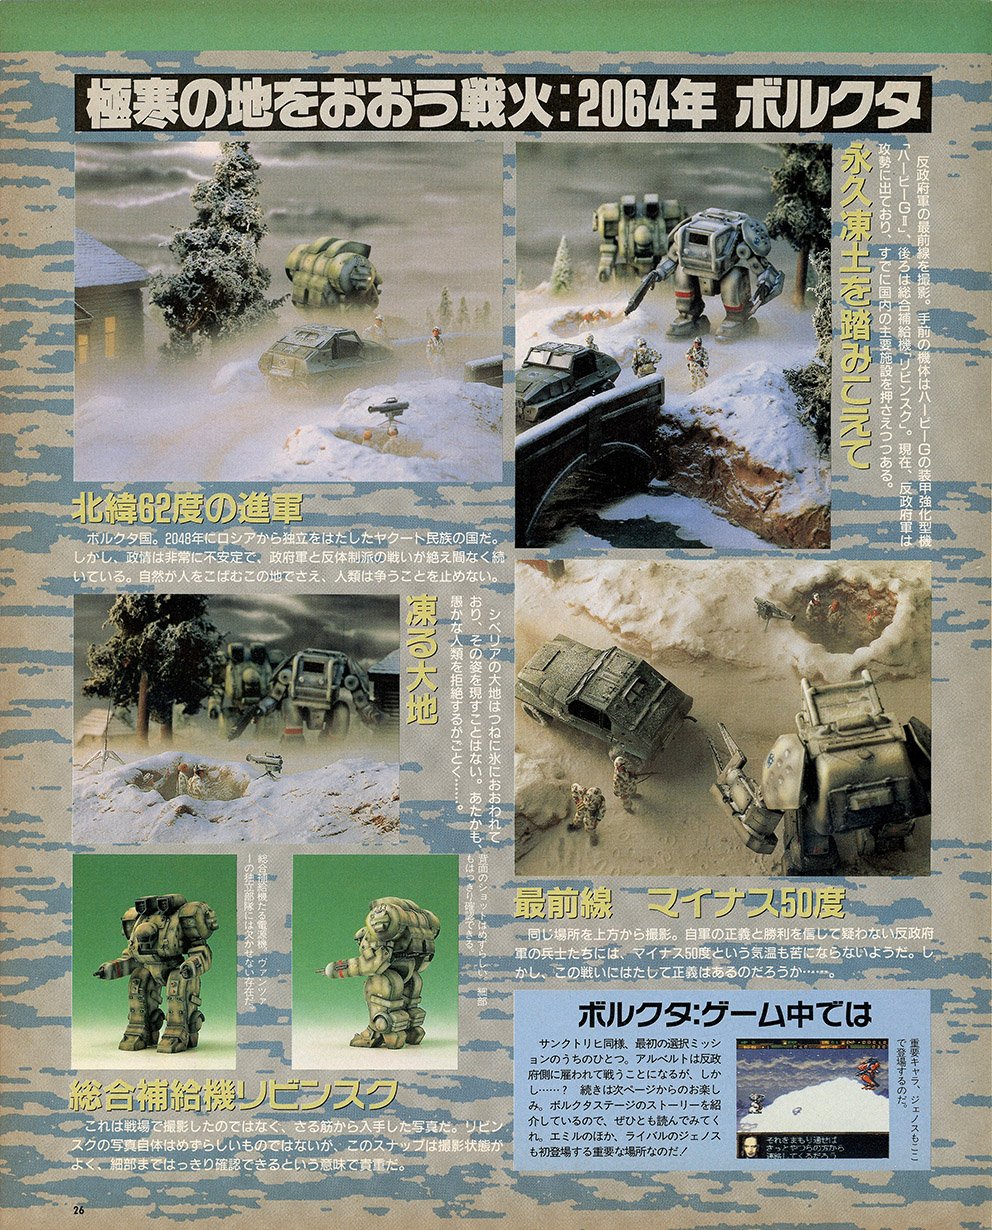 Snes Legacy This A Special About Front Mission Gun Hazard I Don T Know How Was The Game Finally But They Were A Fanatic Of Miniatures There Are A Lot Detailed